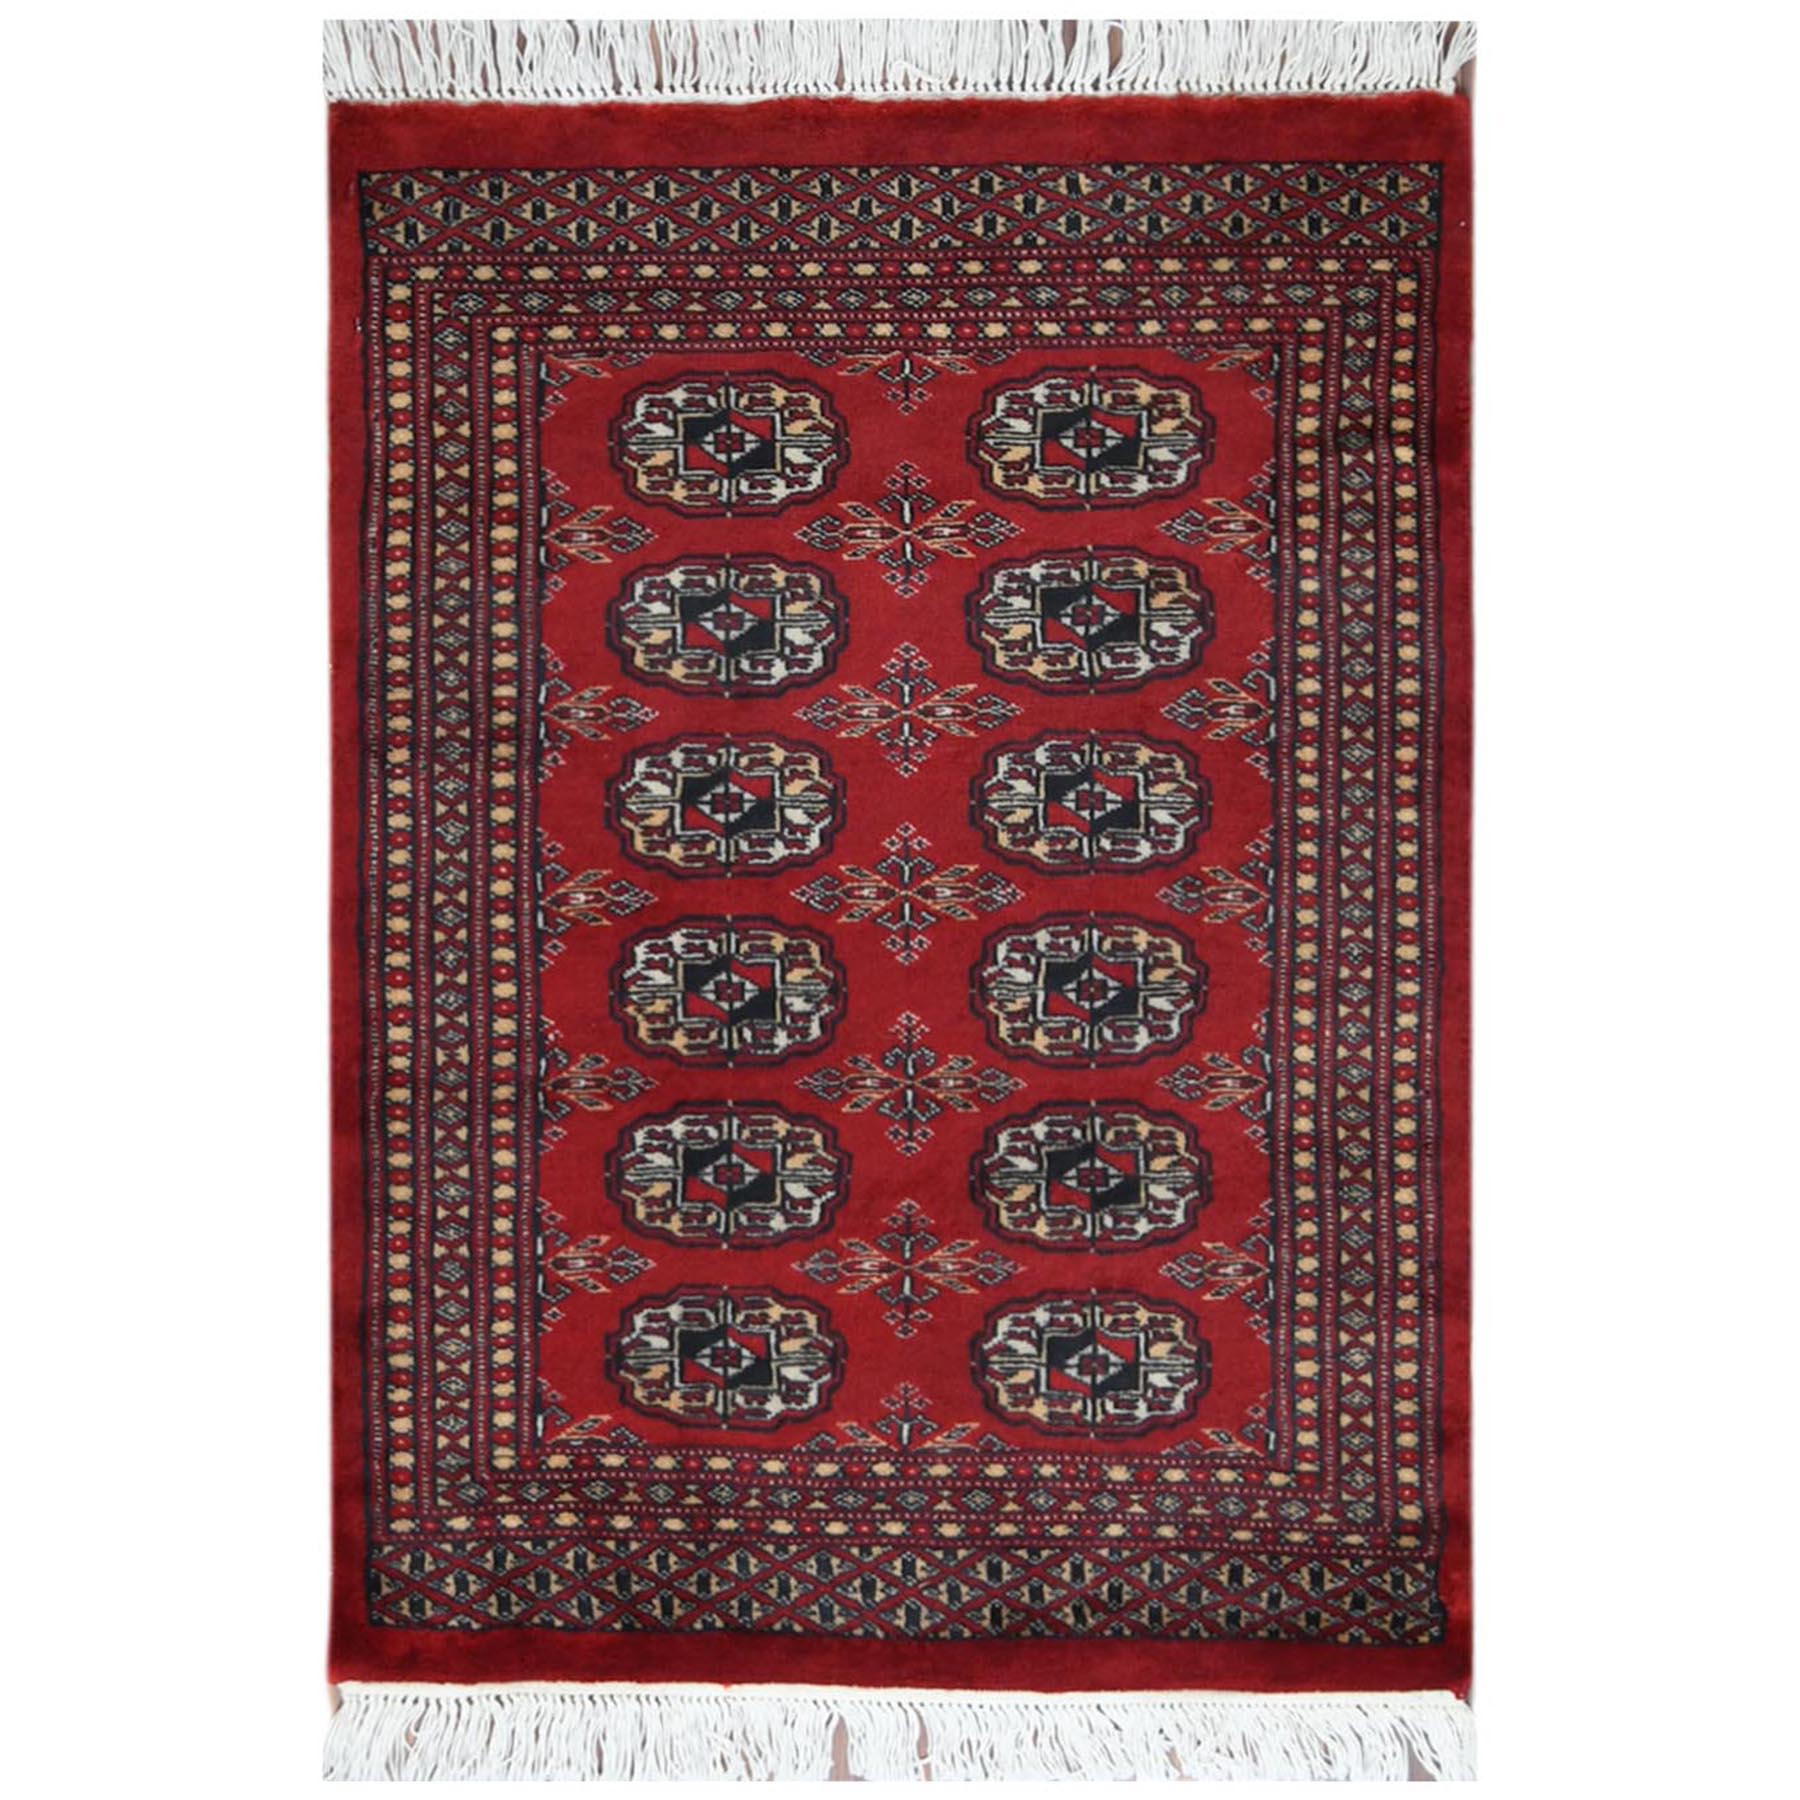 Nomadic And Village Collection Hand Knotted Red Rug No: 1122748